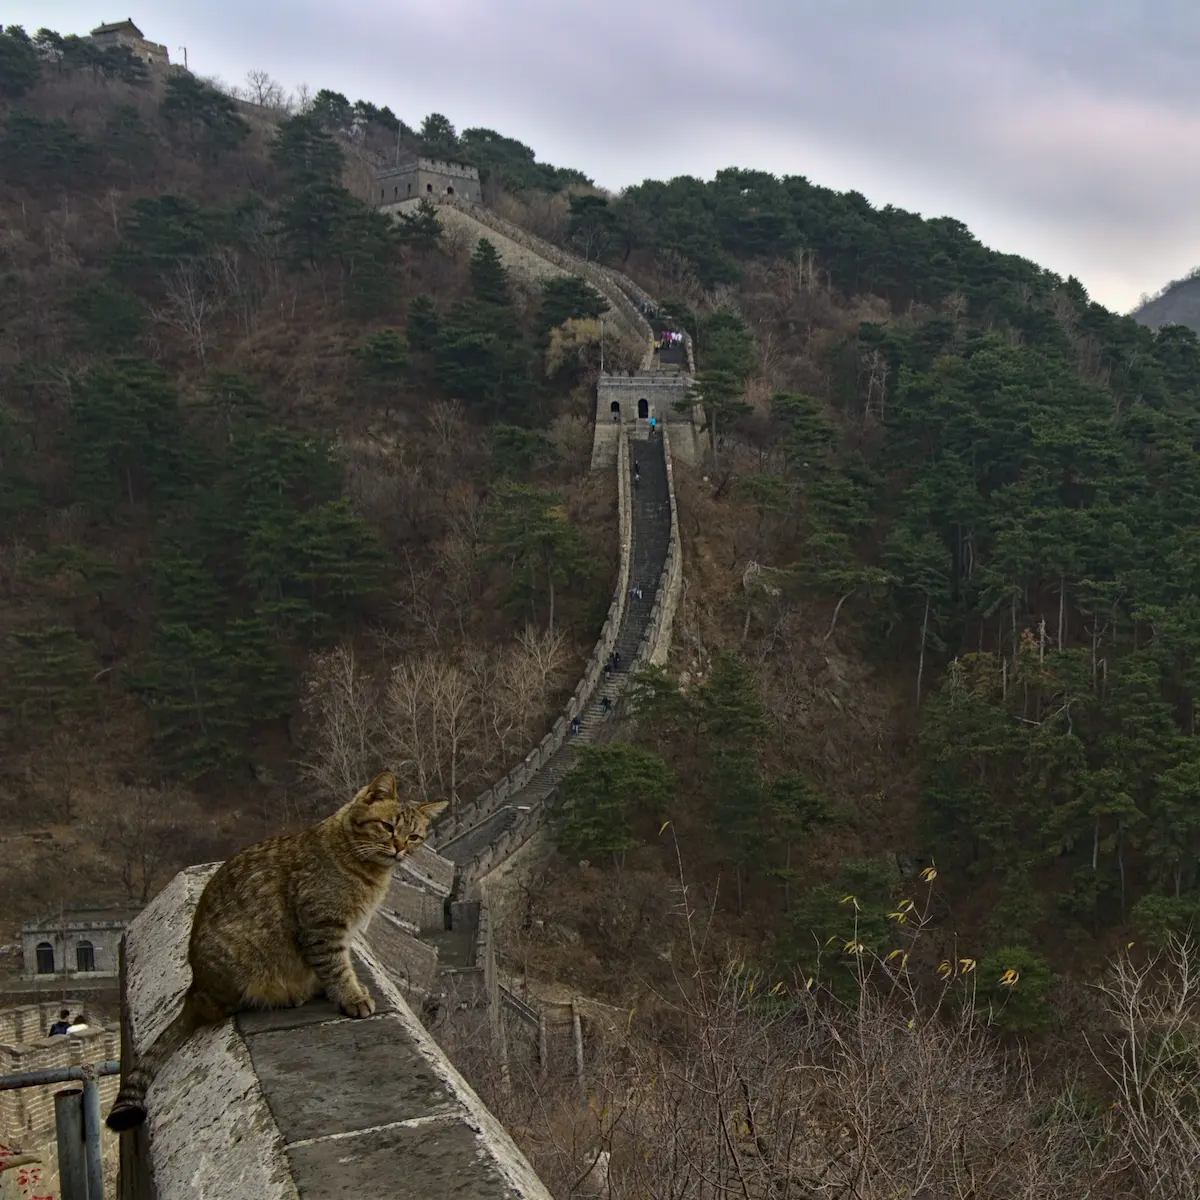 The great wall of china is making its way up a mountain in the background. Since it was autumn at time of shooting most trees are without foliage. In the foreground a cat is sitting on the wall, looking at the camera.